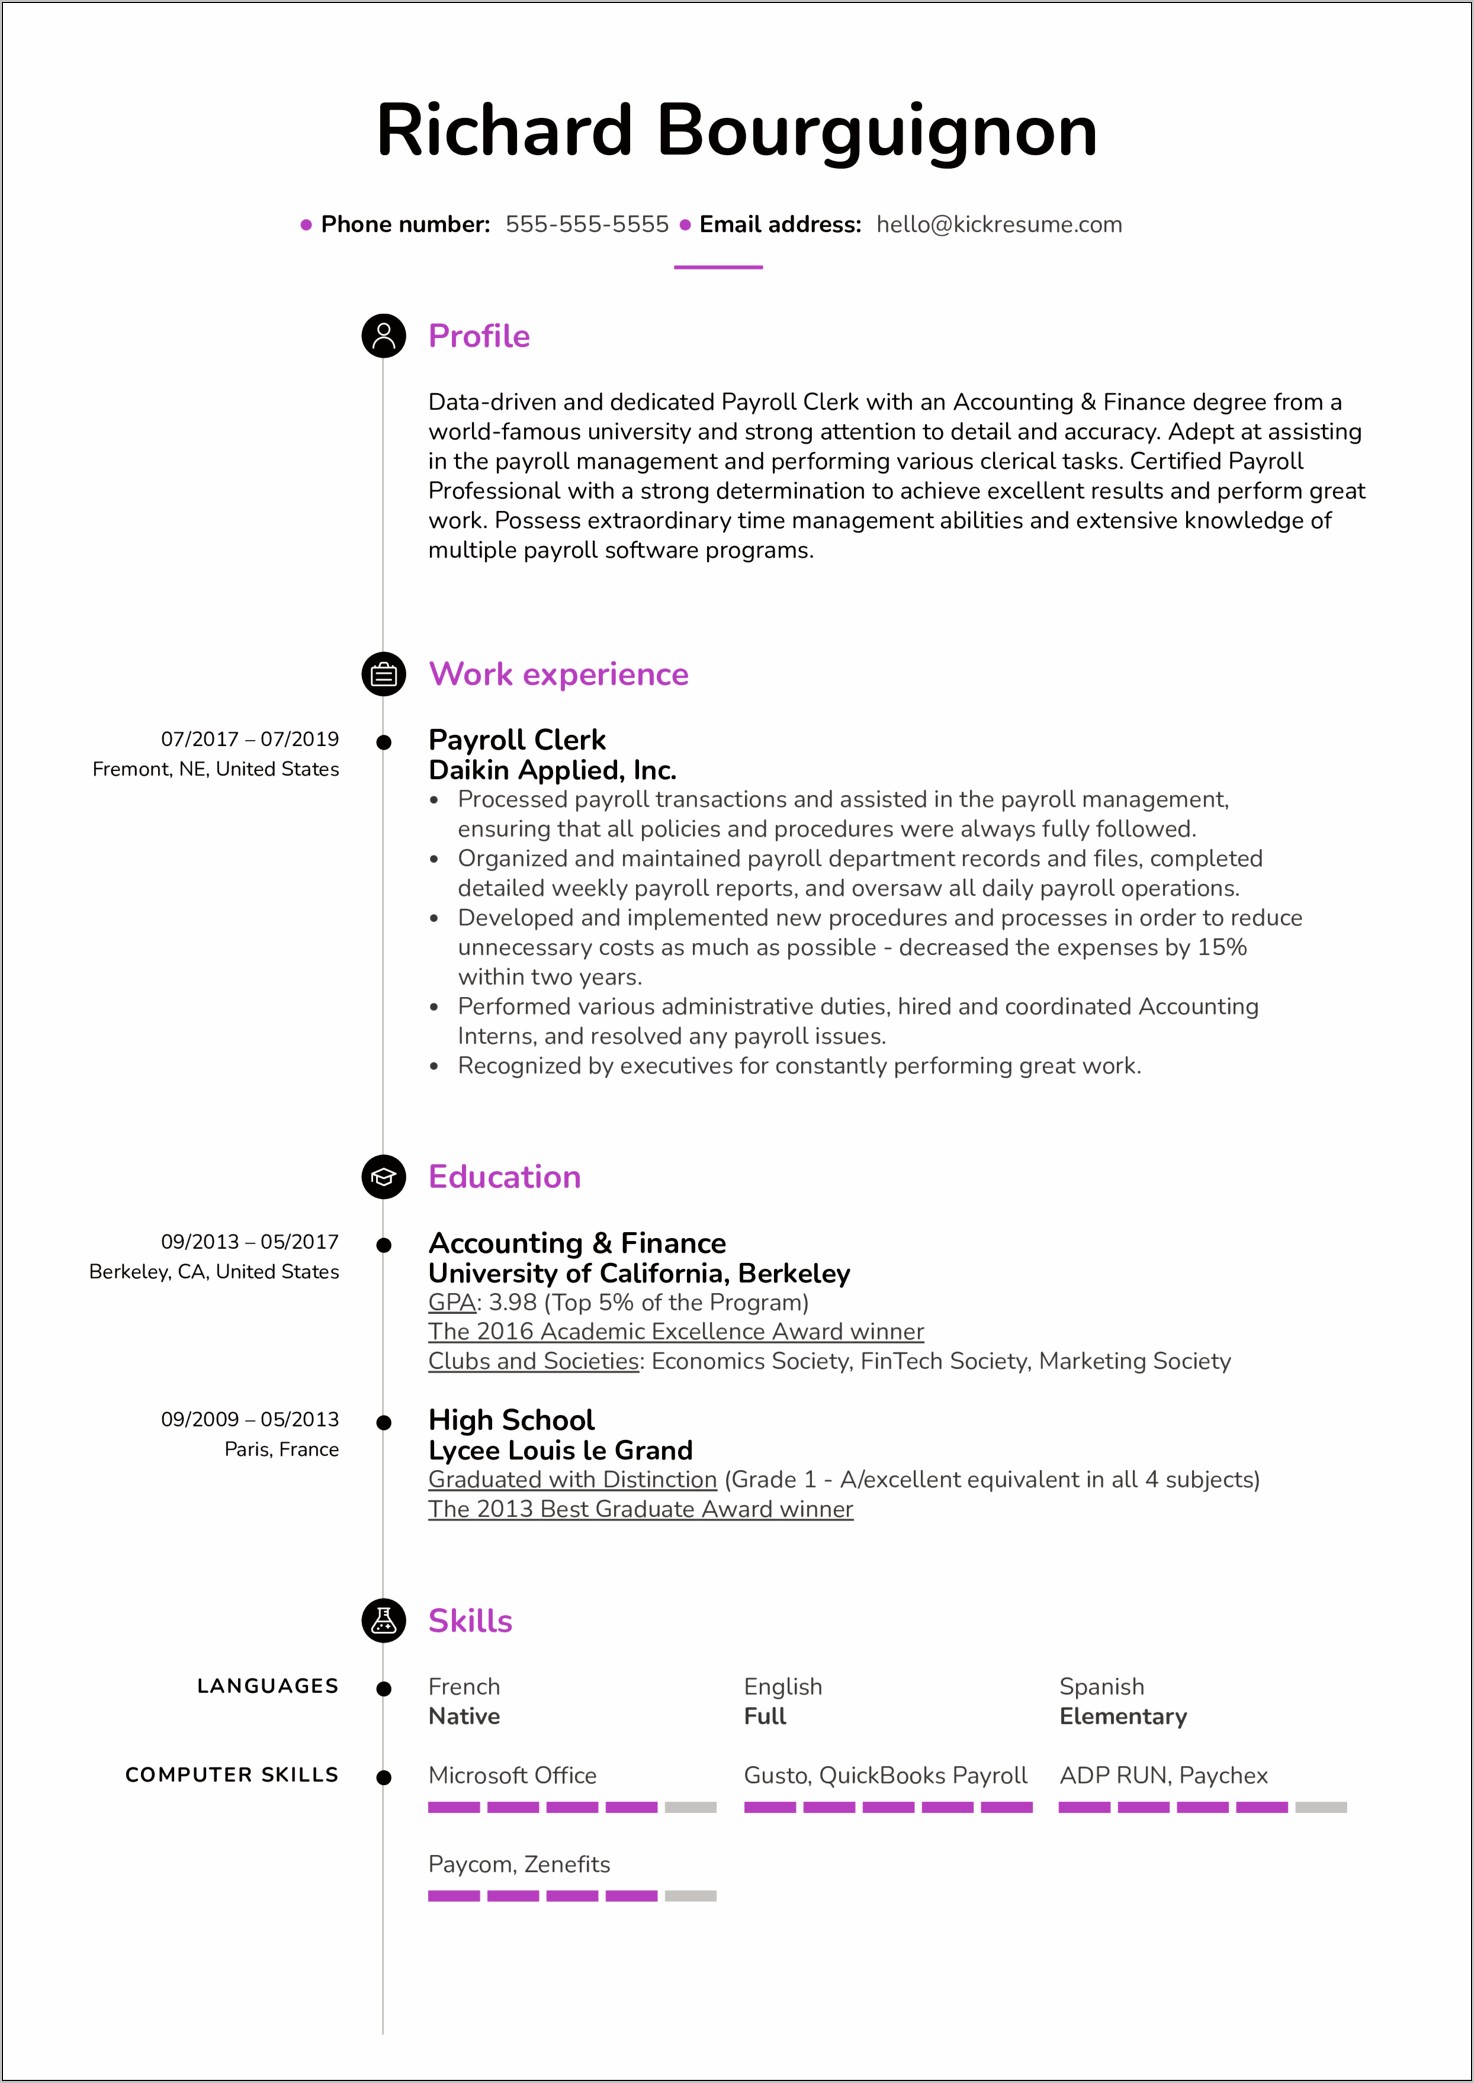 Resume Summary Examples For Clerical